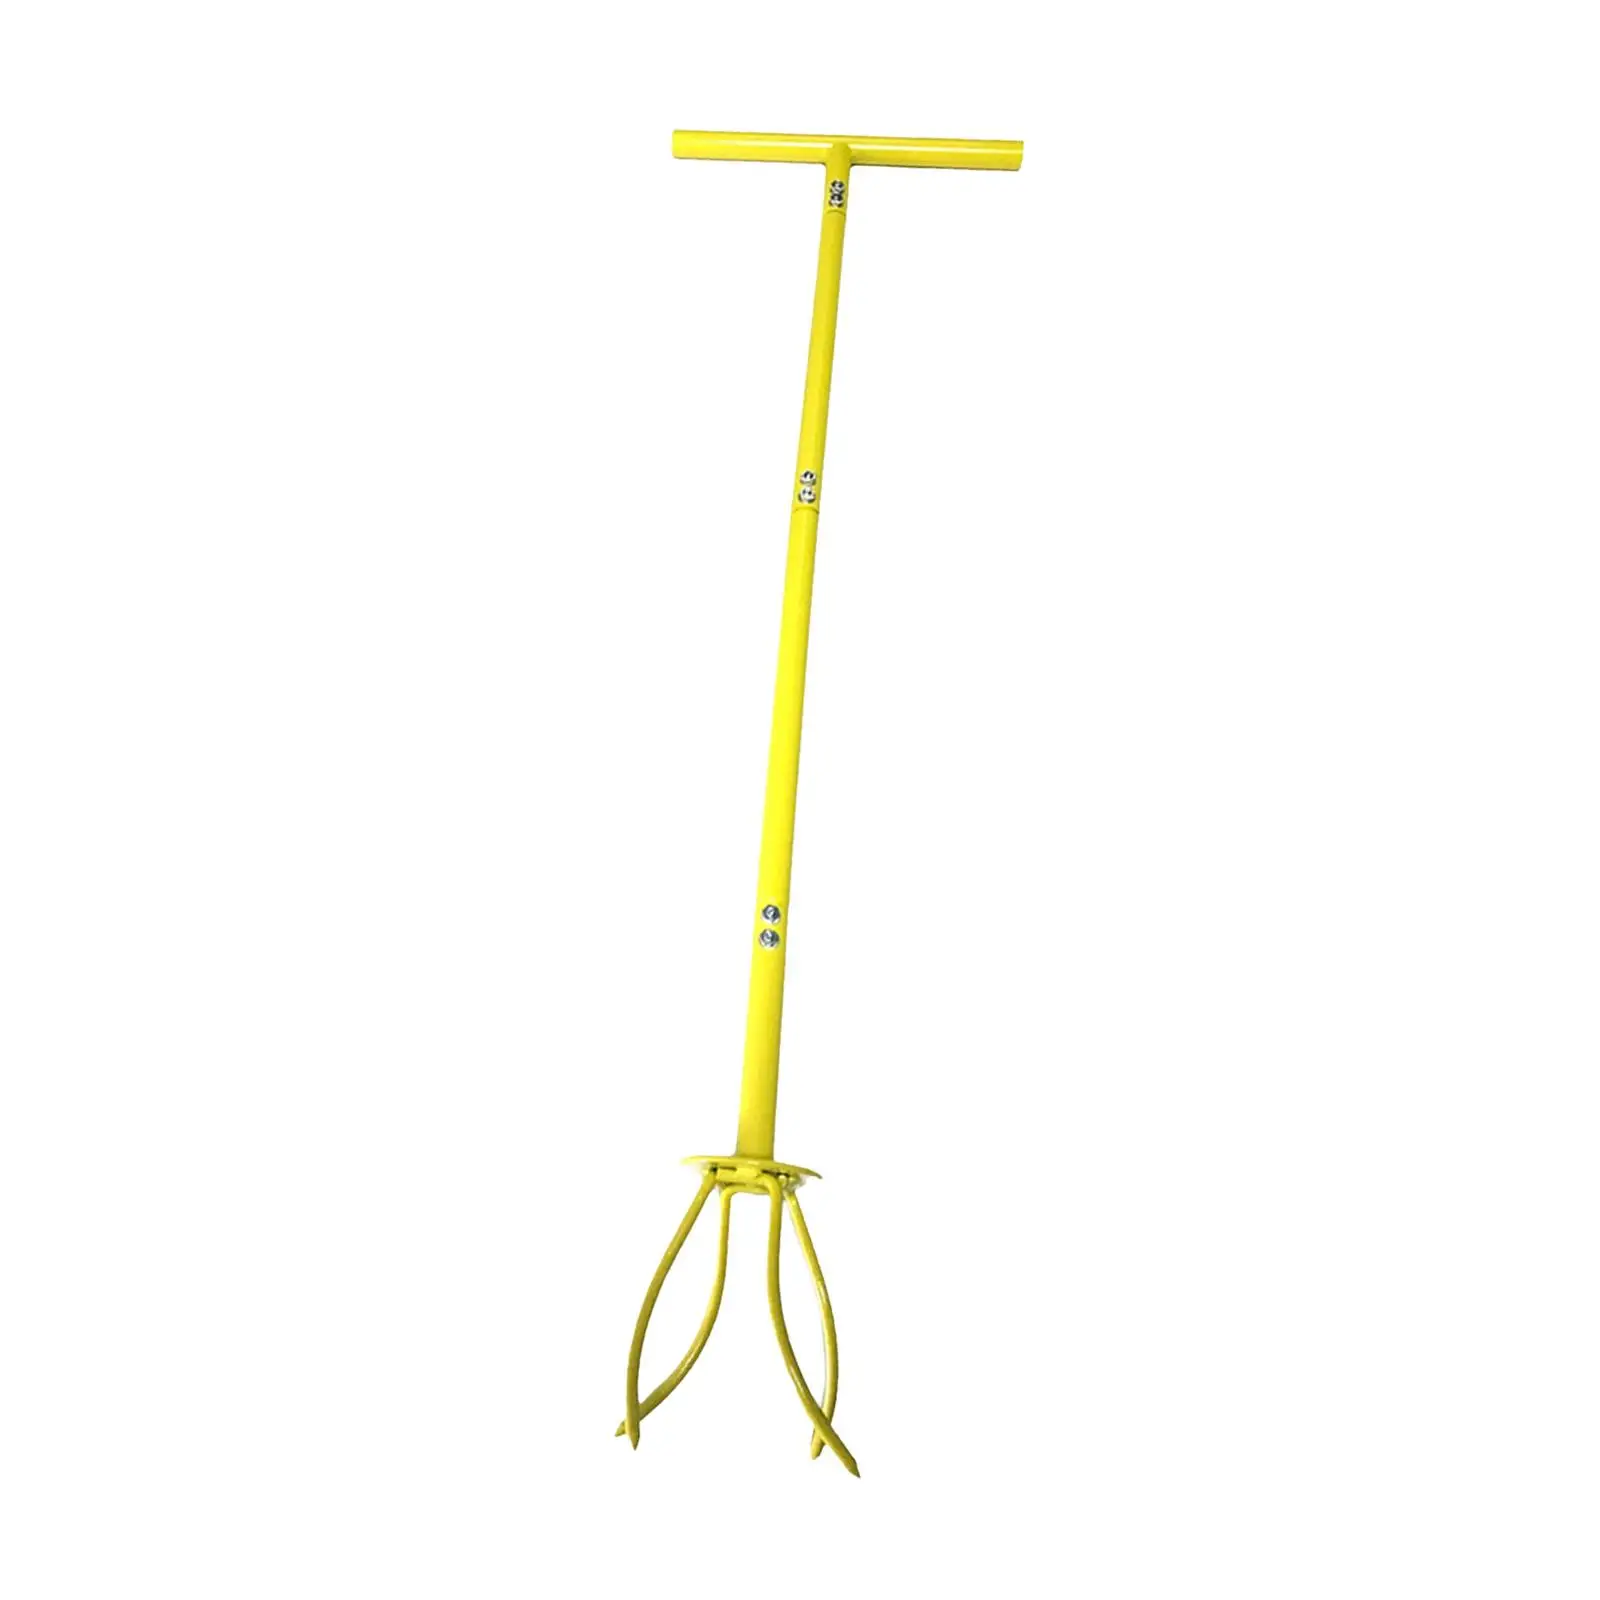 Gardening Claw Tool Cultivator with Adjustable Long Handle Manual Soil Grabber